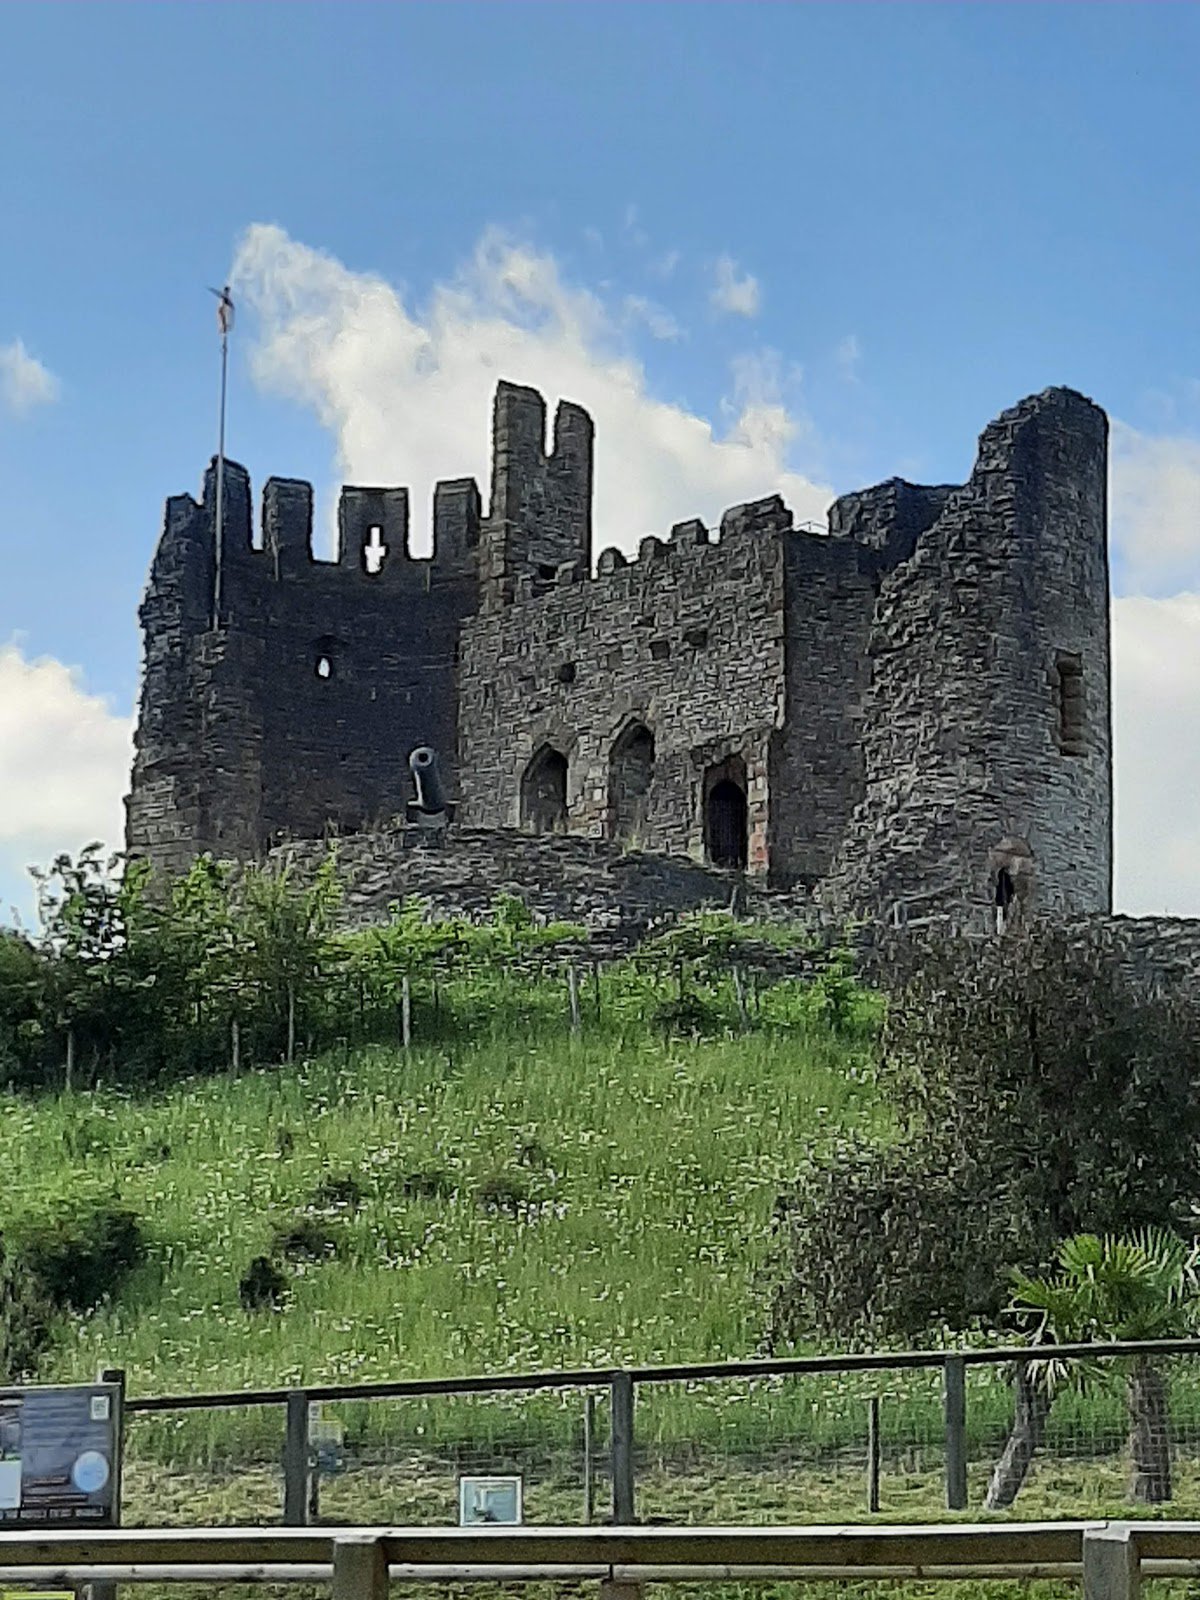 A picture of Dudley Zoo and Castle